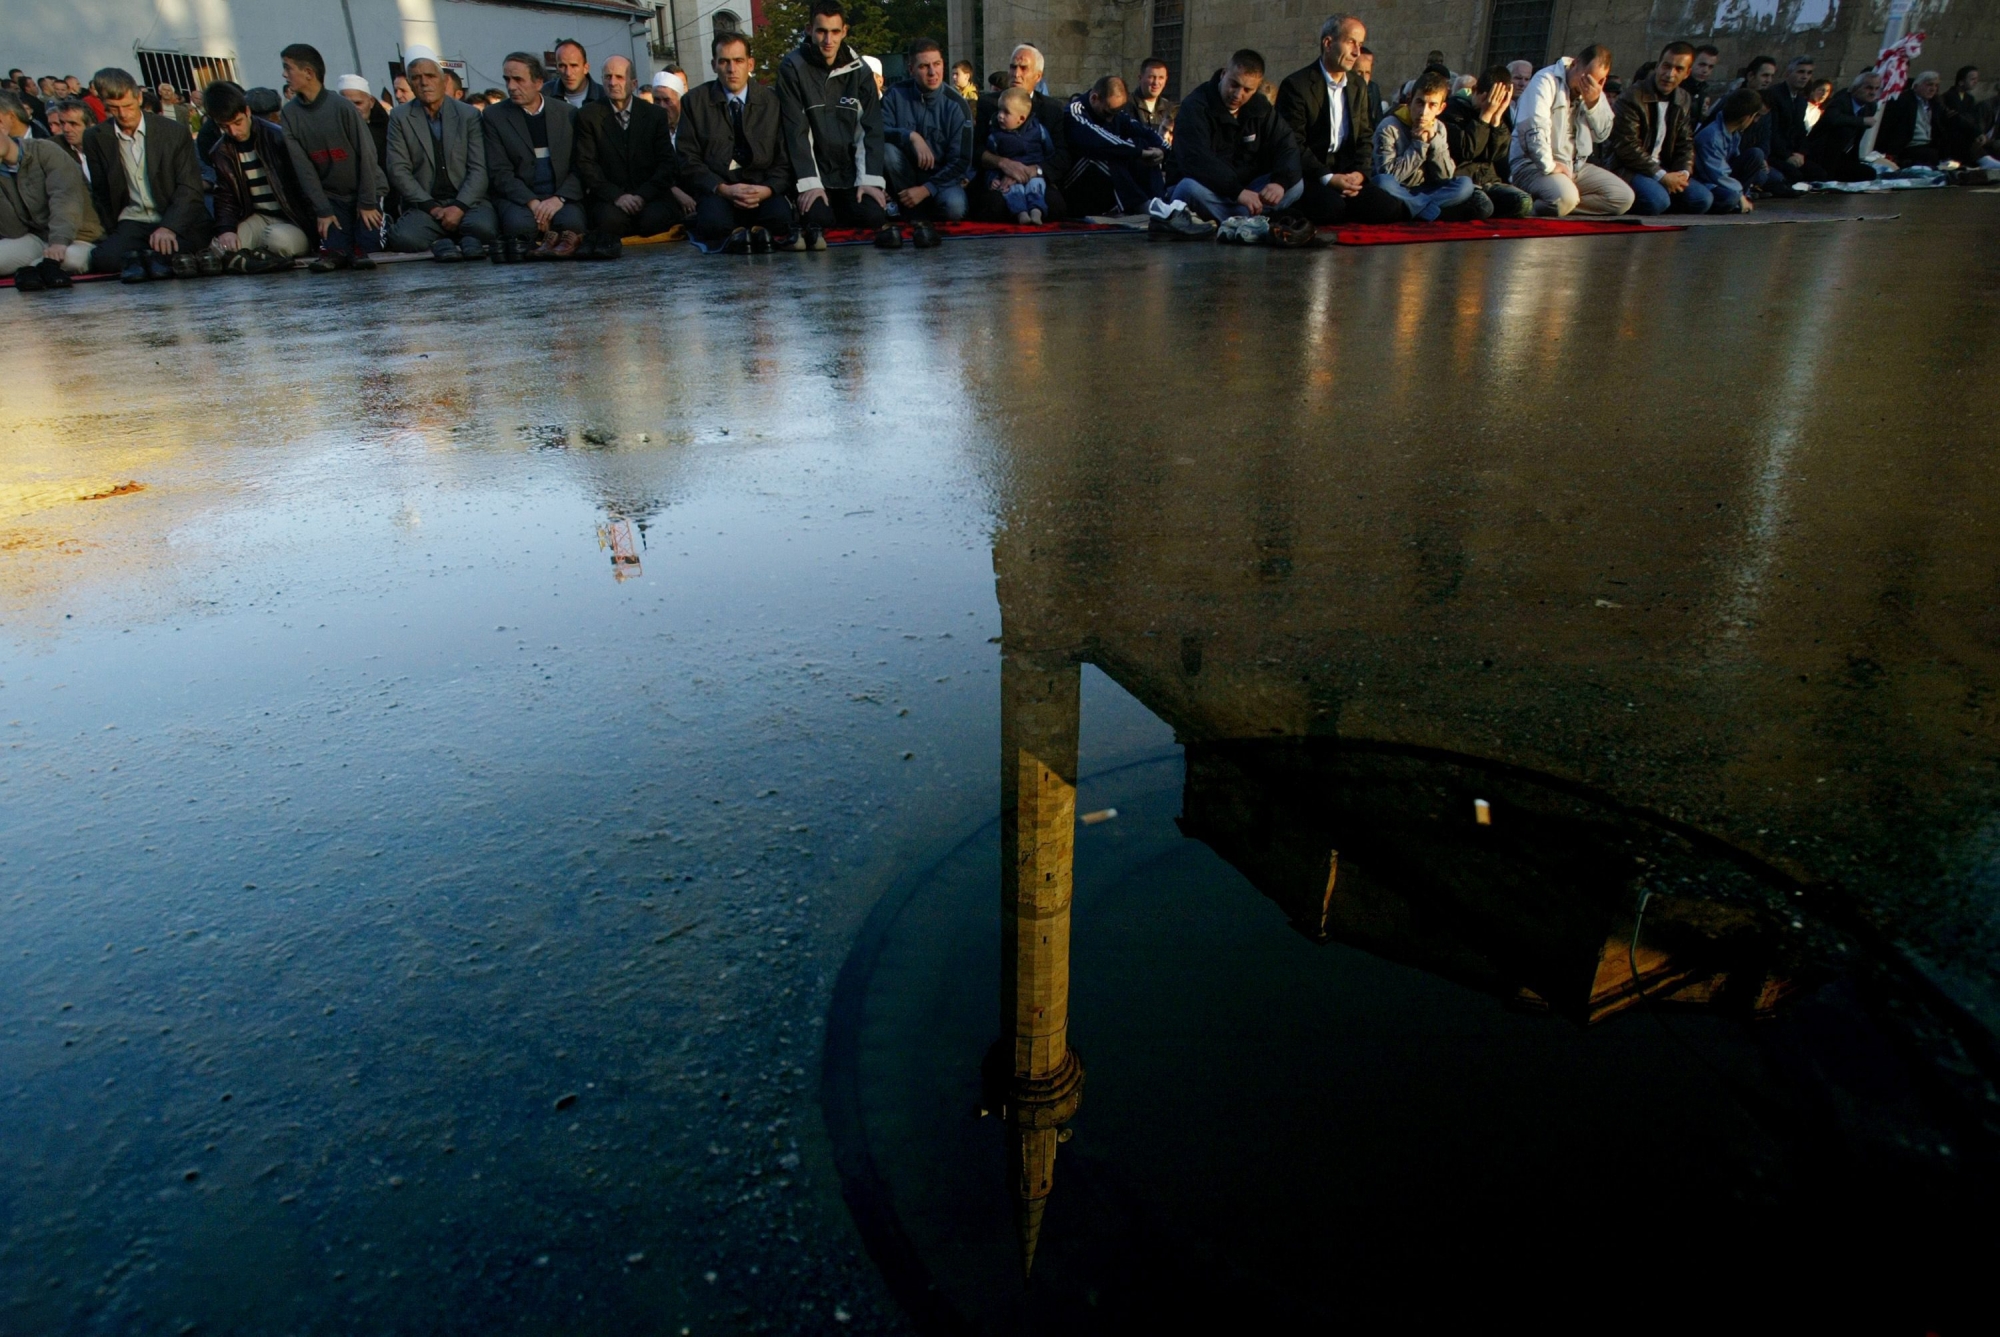 Reflection of the Grand Mosque is seen in a pudle of water as Kosovo muslims are lined up in the streets of capital Pristina on Monday, Oct. 23, 2006, after prayers marking the first day of Eid al-Fitr celebrations, the end of the holy month of Ramadan.. (AP Photo / Visar Kryeziu) KOSOVO RAMADAN